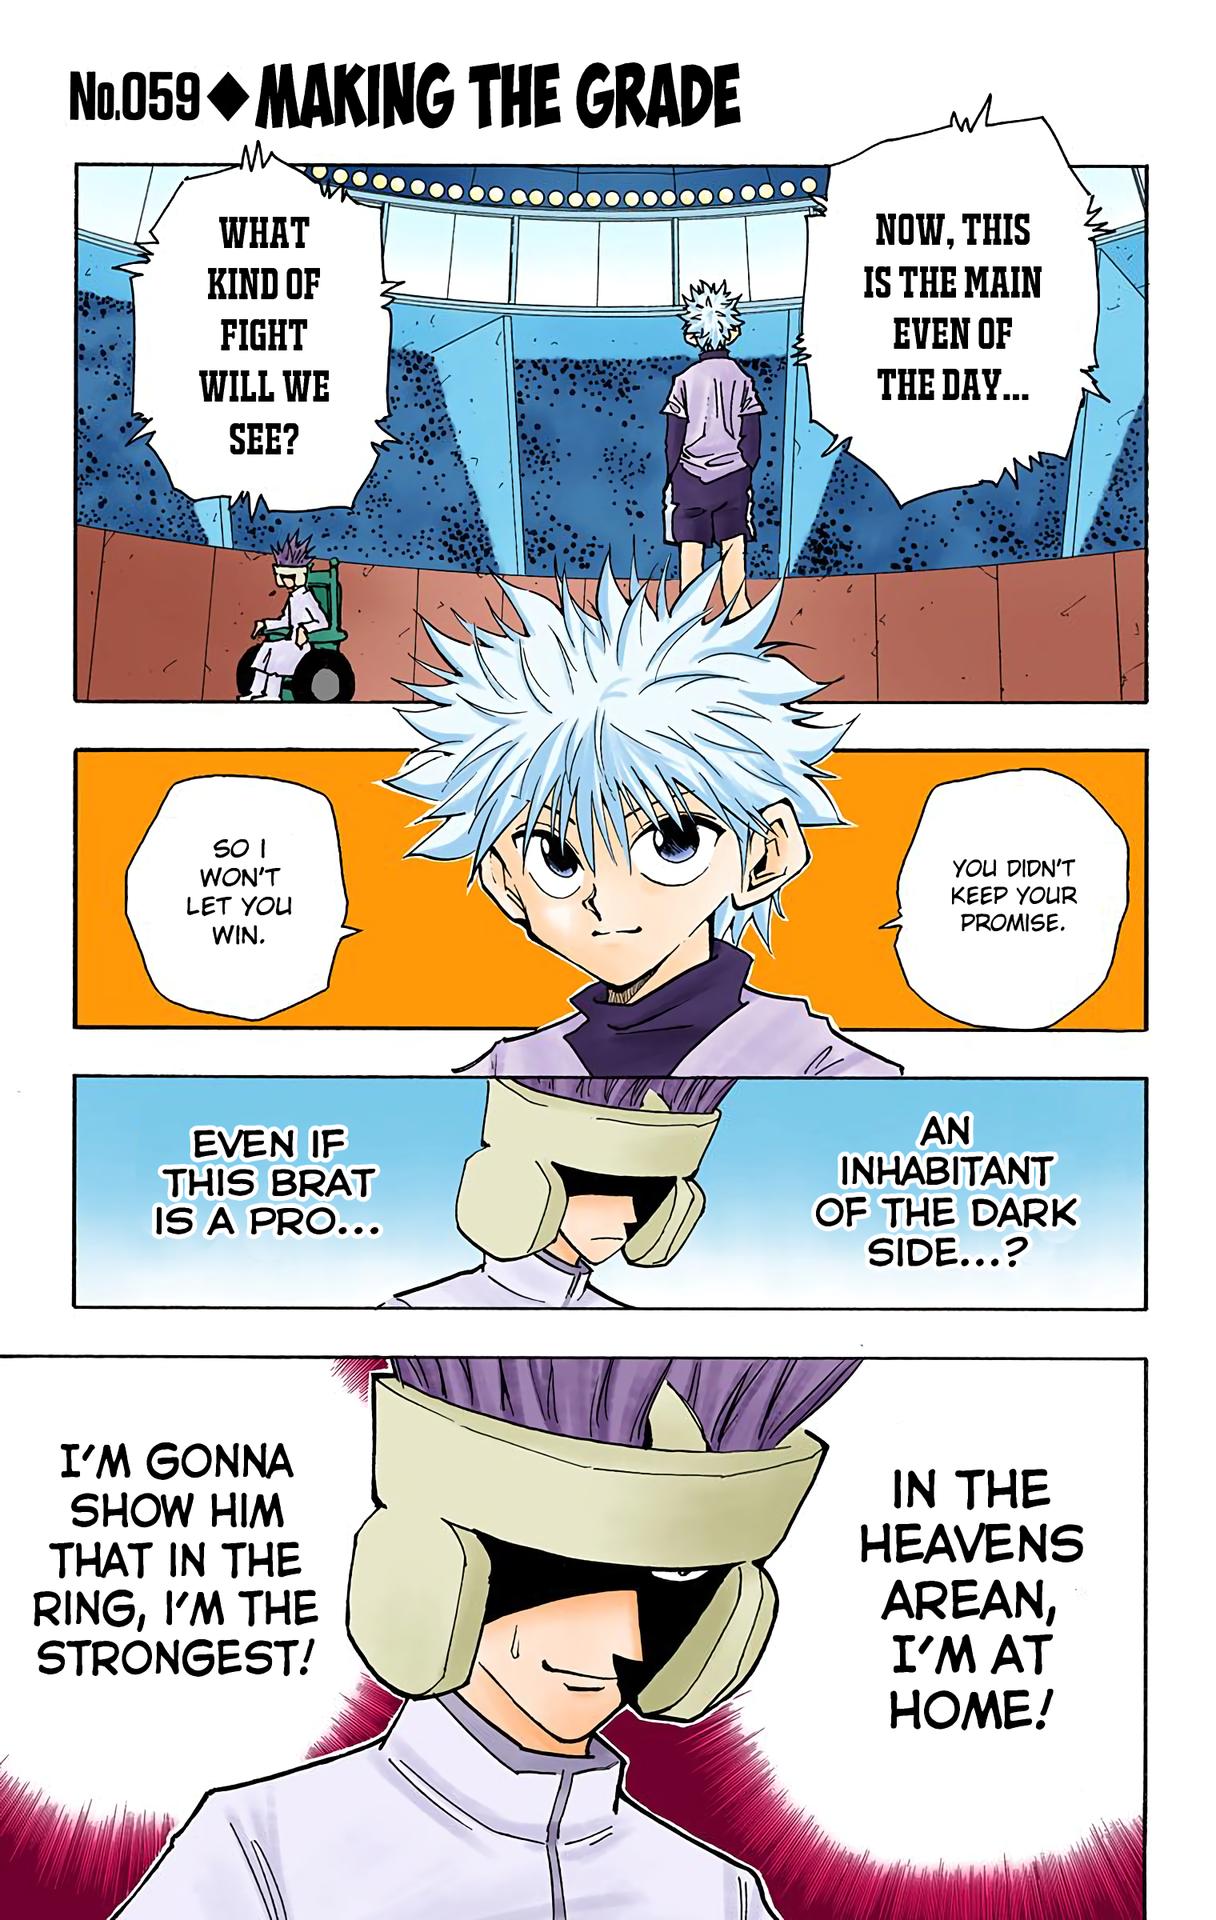 Read Hunter X Hunter Full Color Vol.5 Chapter 38: Ging Freecss on